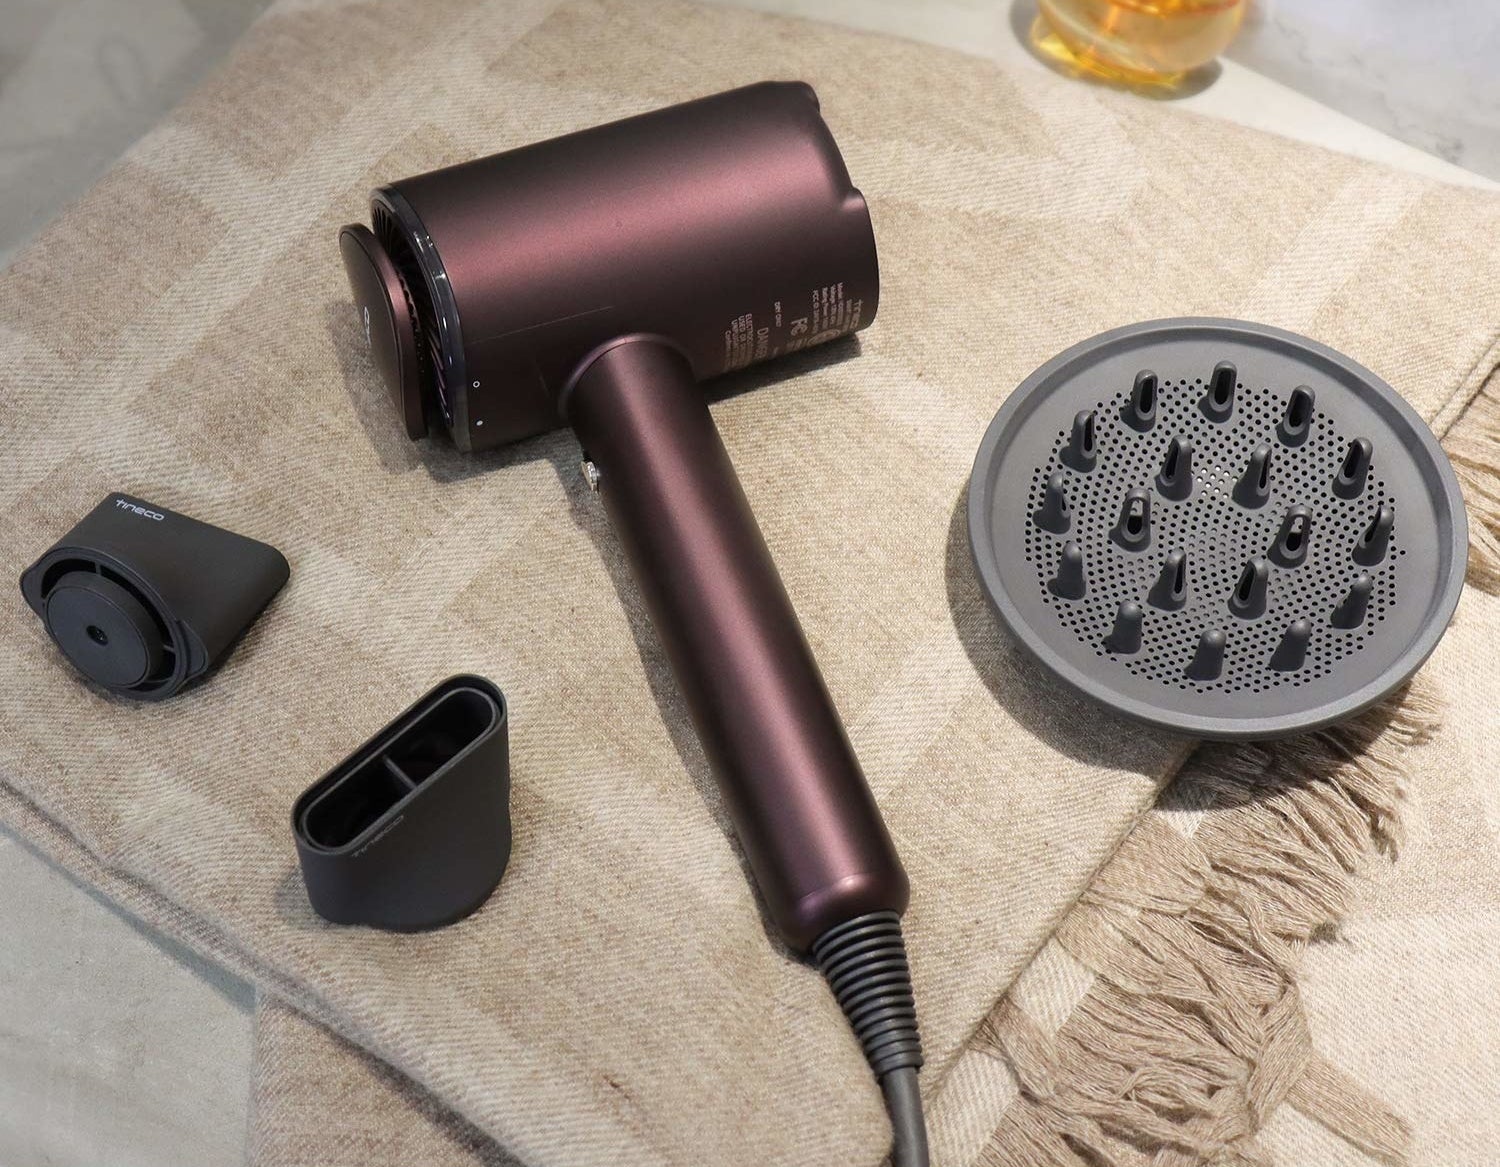 the purple metallic dryer with a black diffuser and two attachments